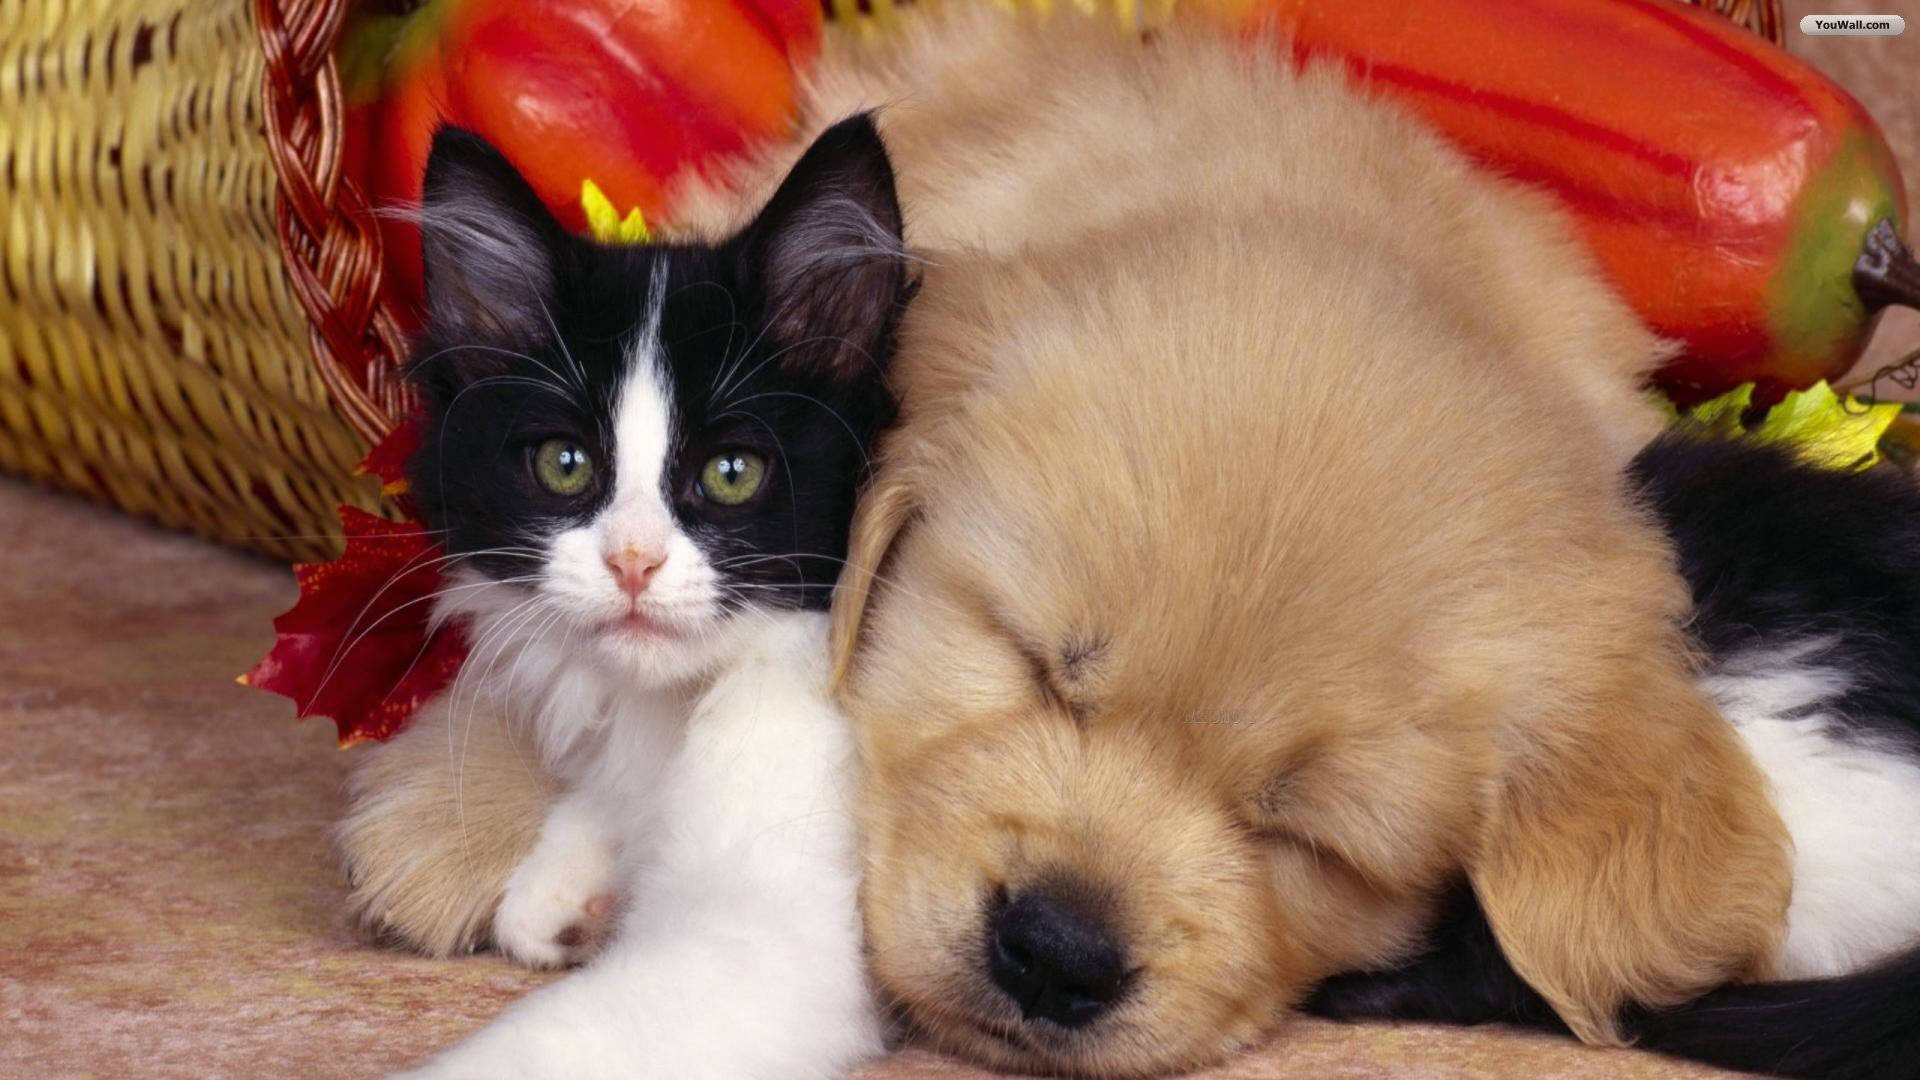 Cat And Dog On Top Of Each Other Wallpaper